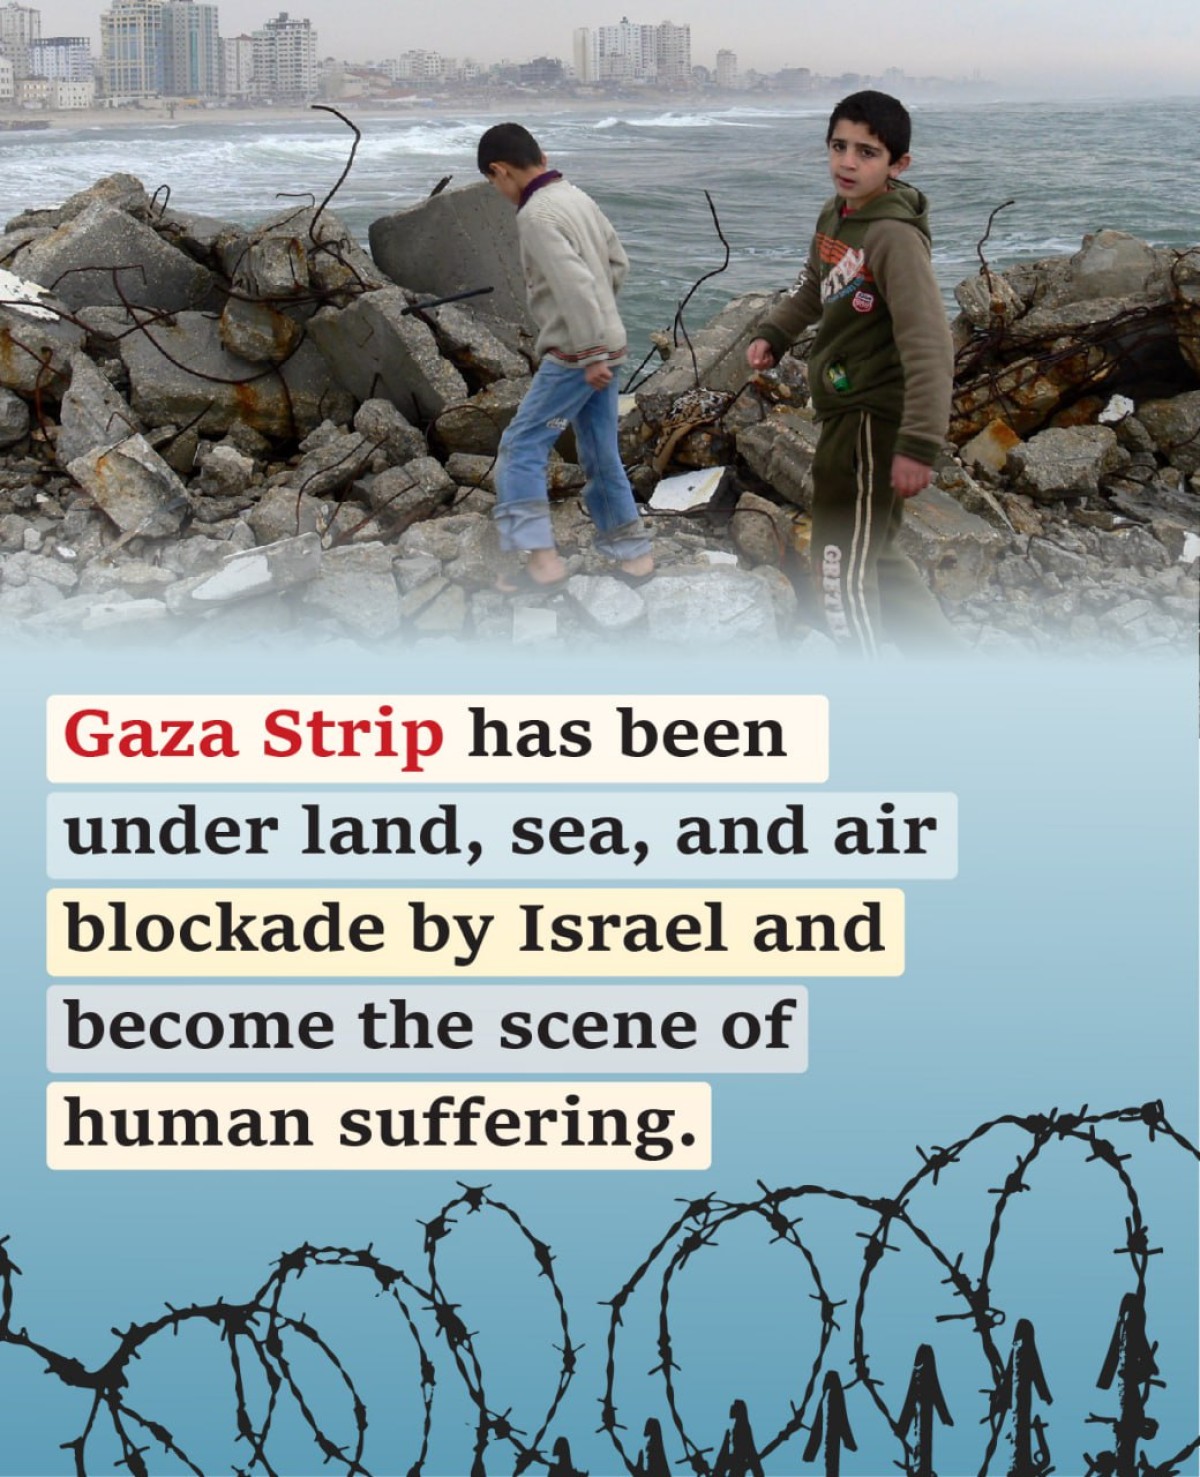 Gaza Strip has been under land, sea, and air blockade by Israel and become the scene of human suffering.